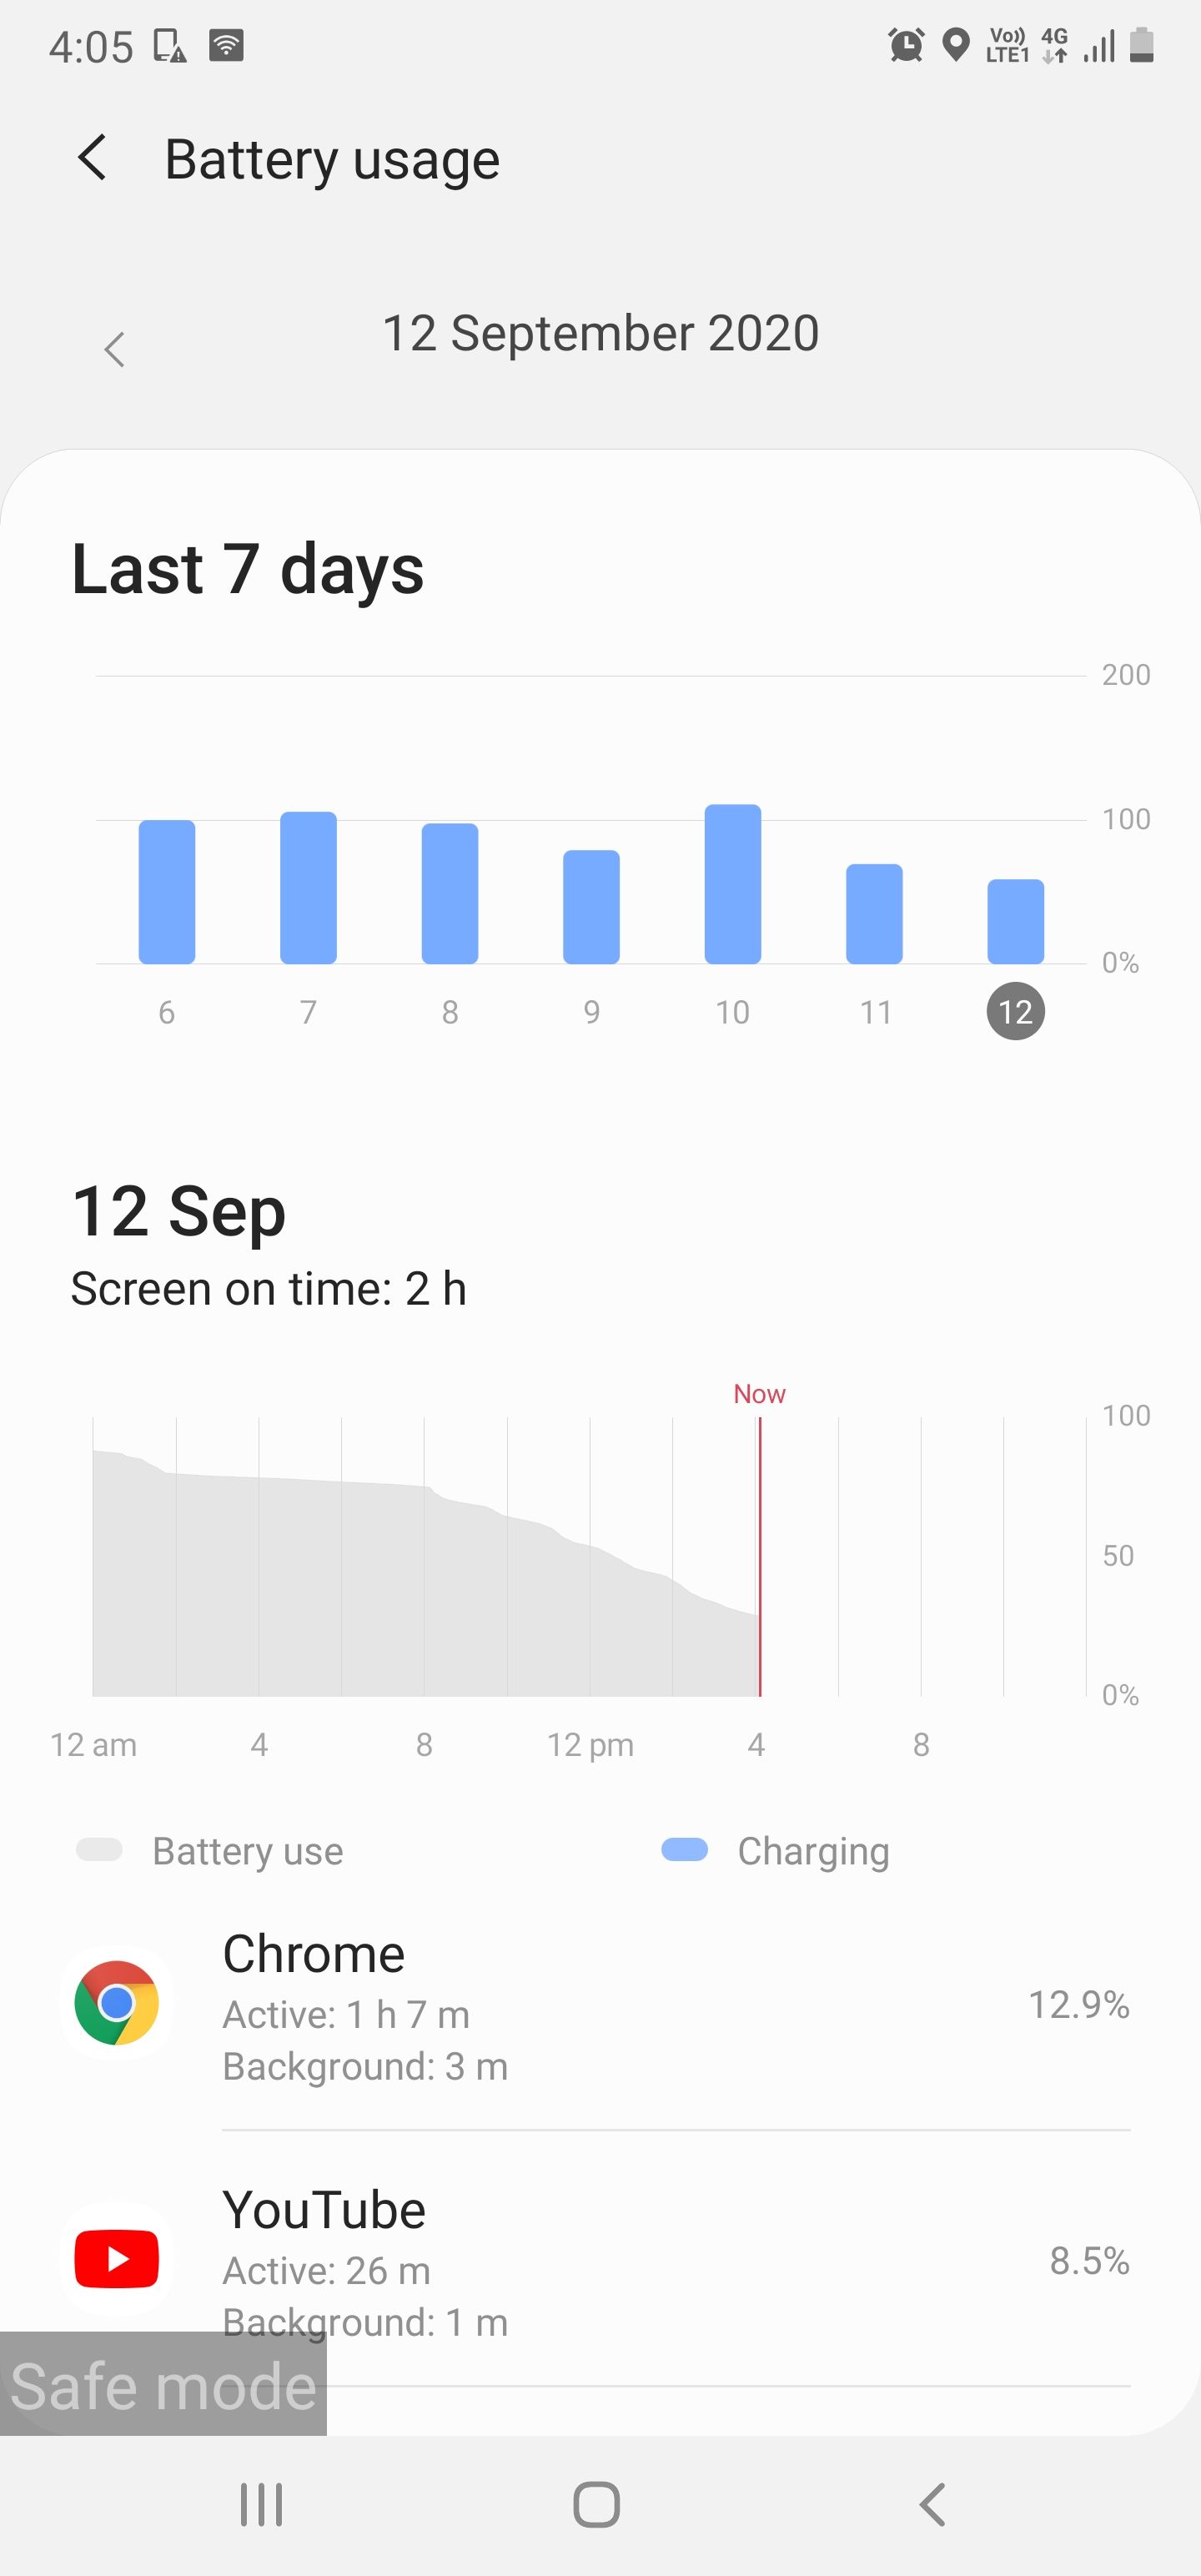 note 20 ultra battery issues - Samsung Community